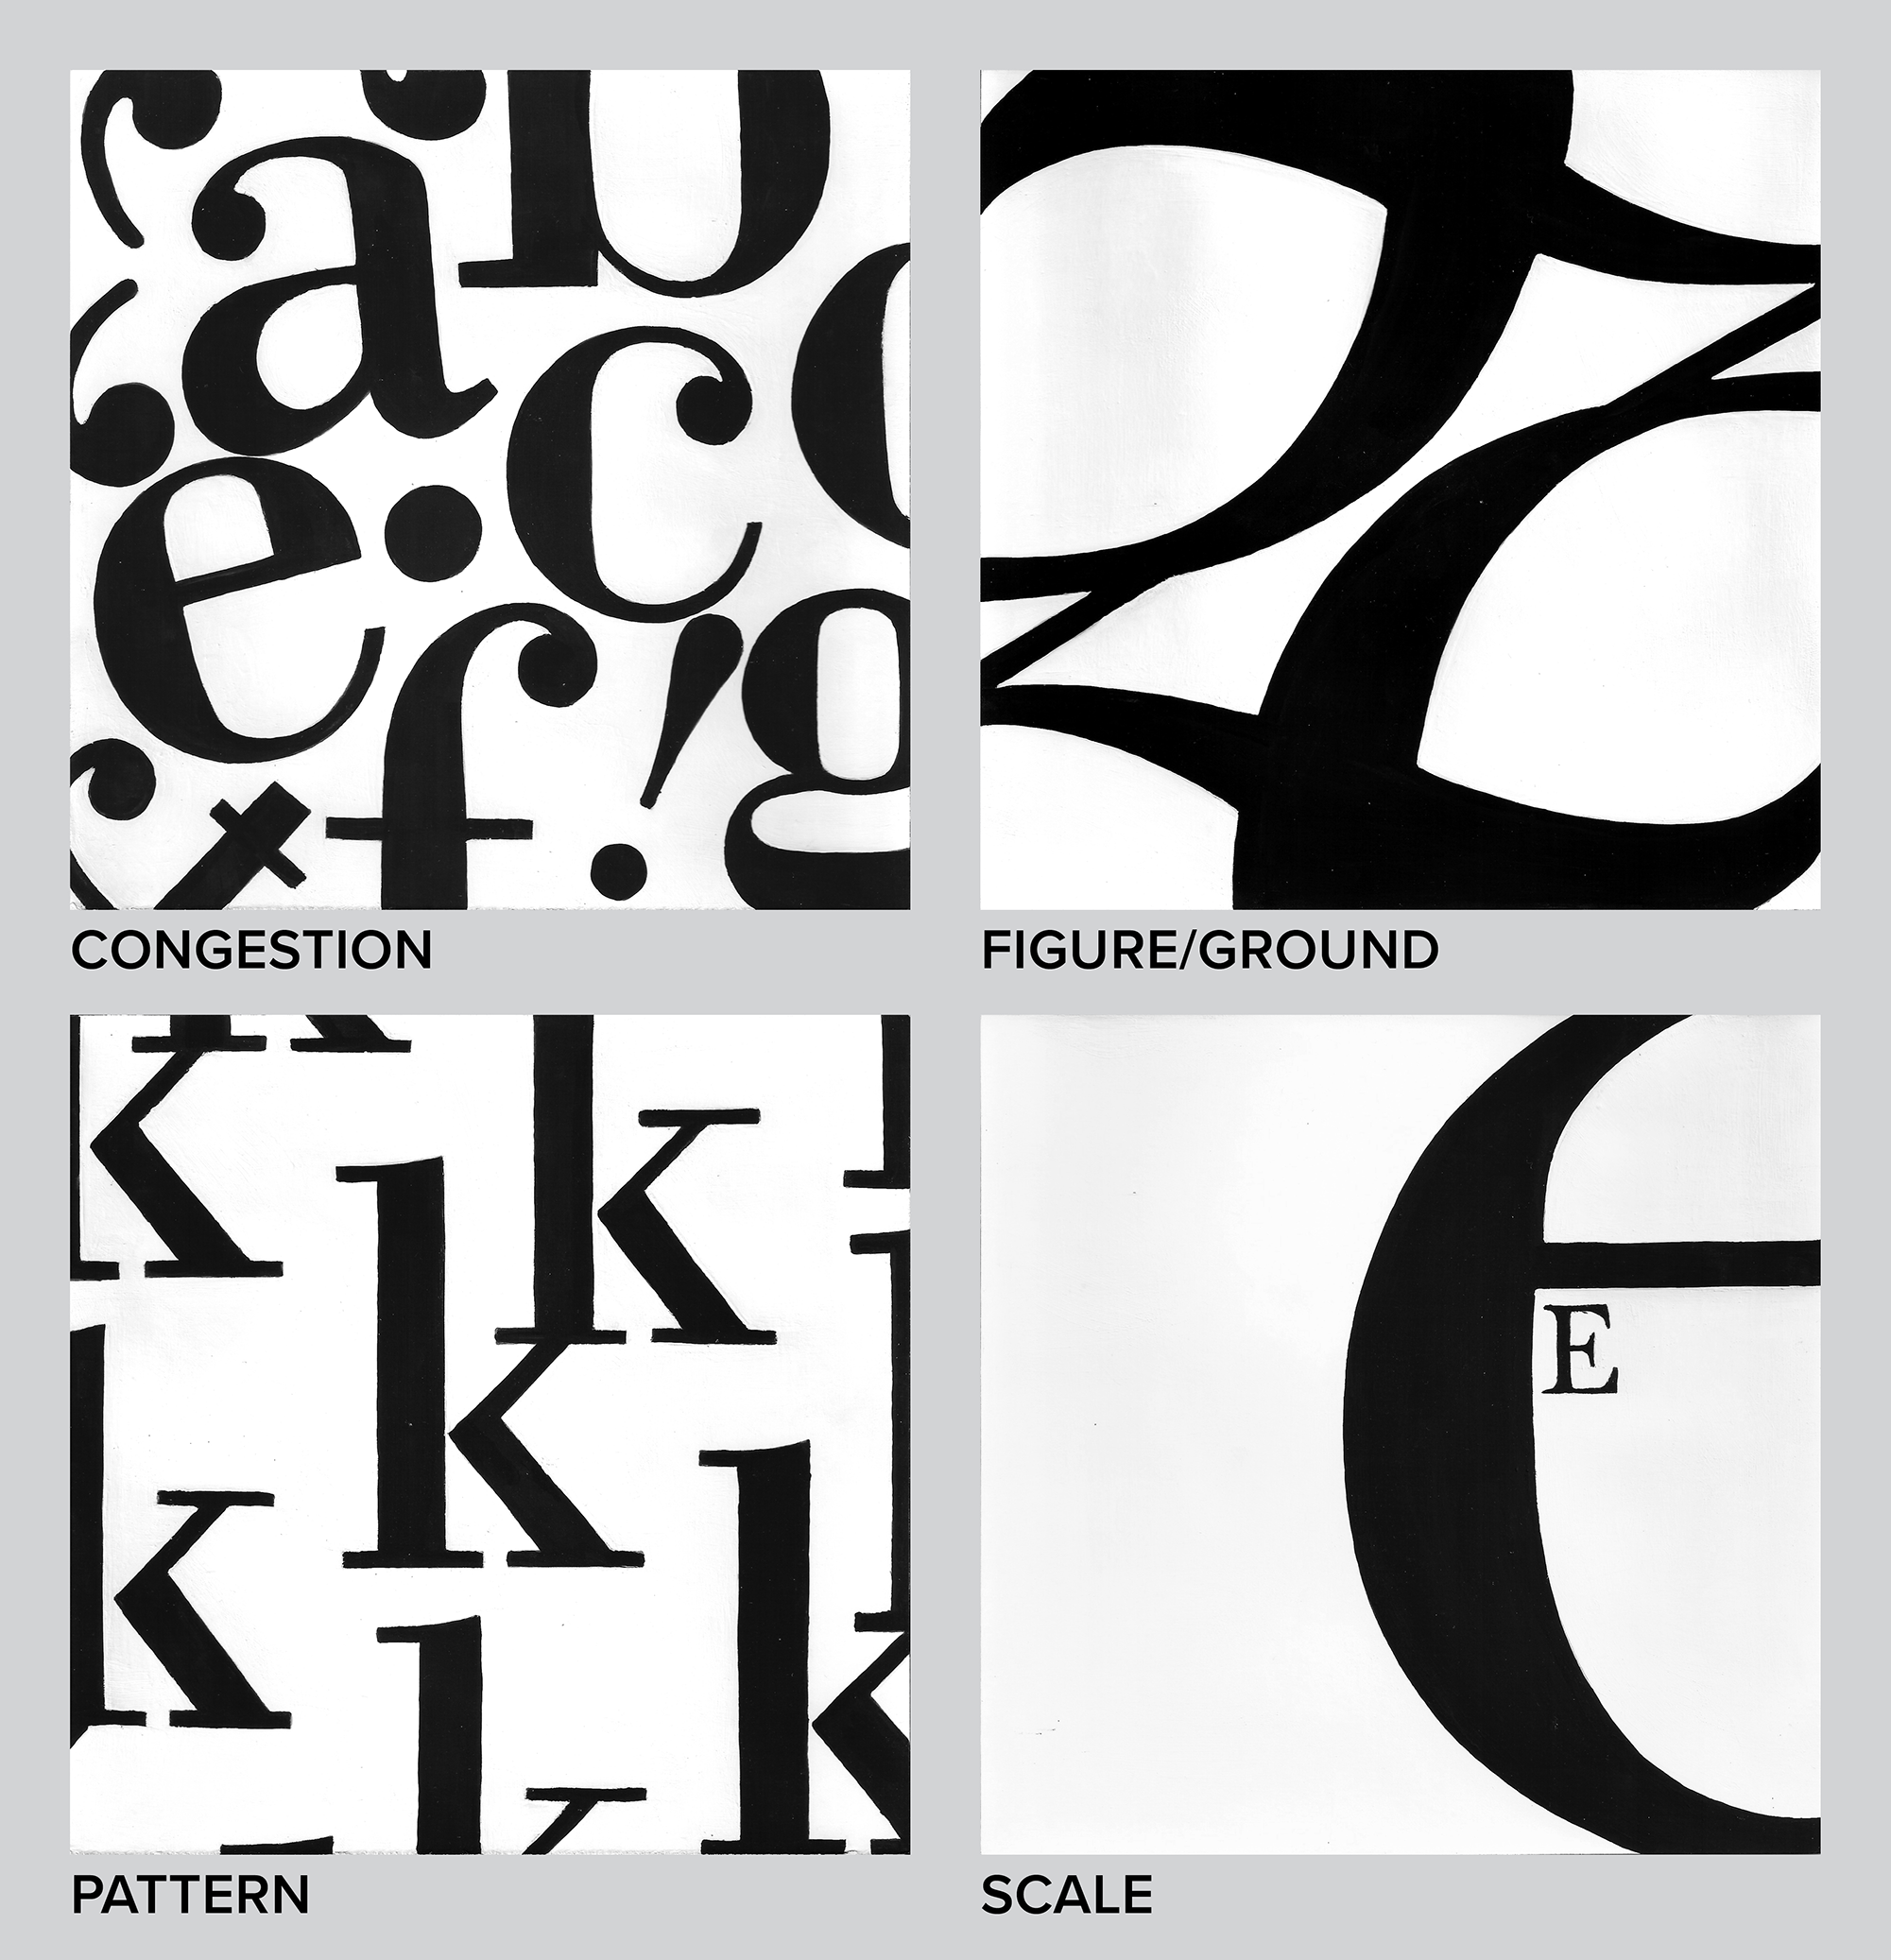 Basic Type Compositions by Cassidy Gwaltney